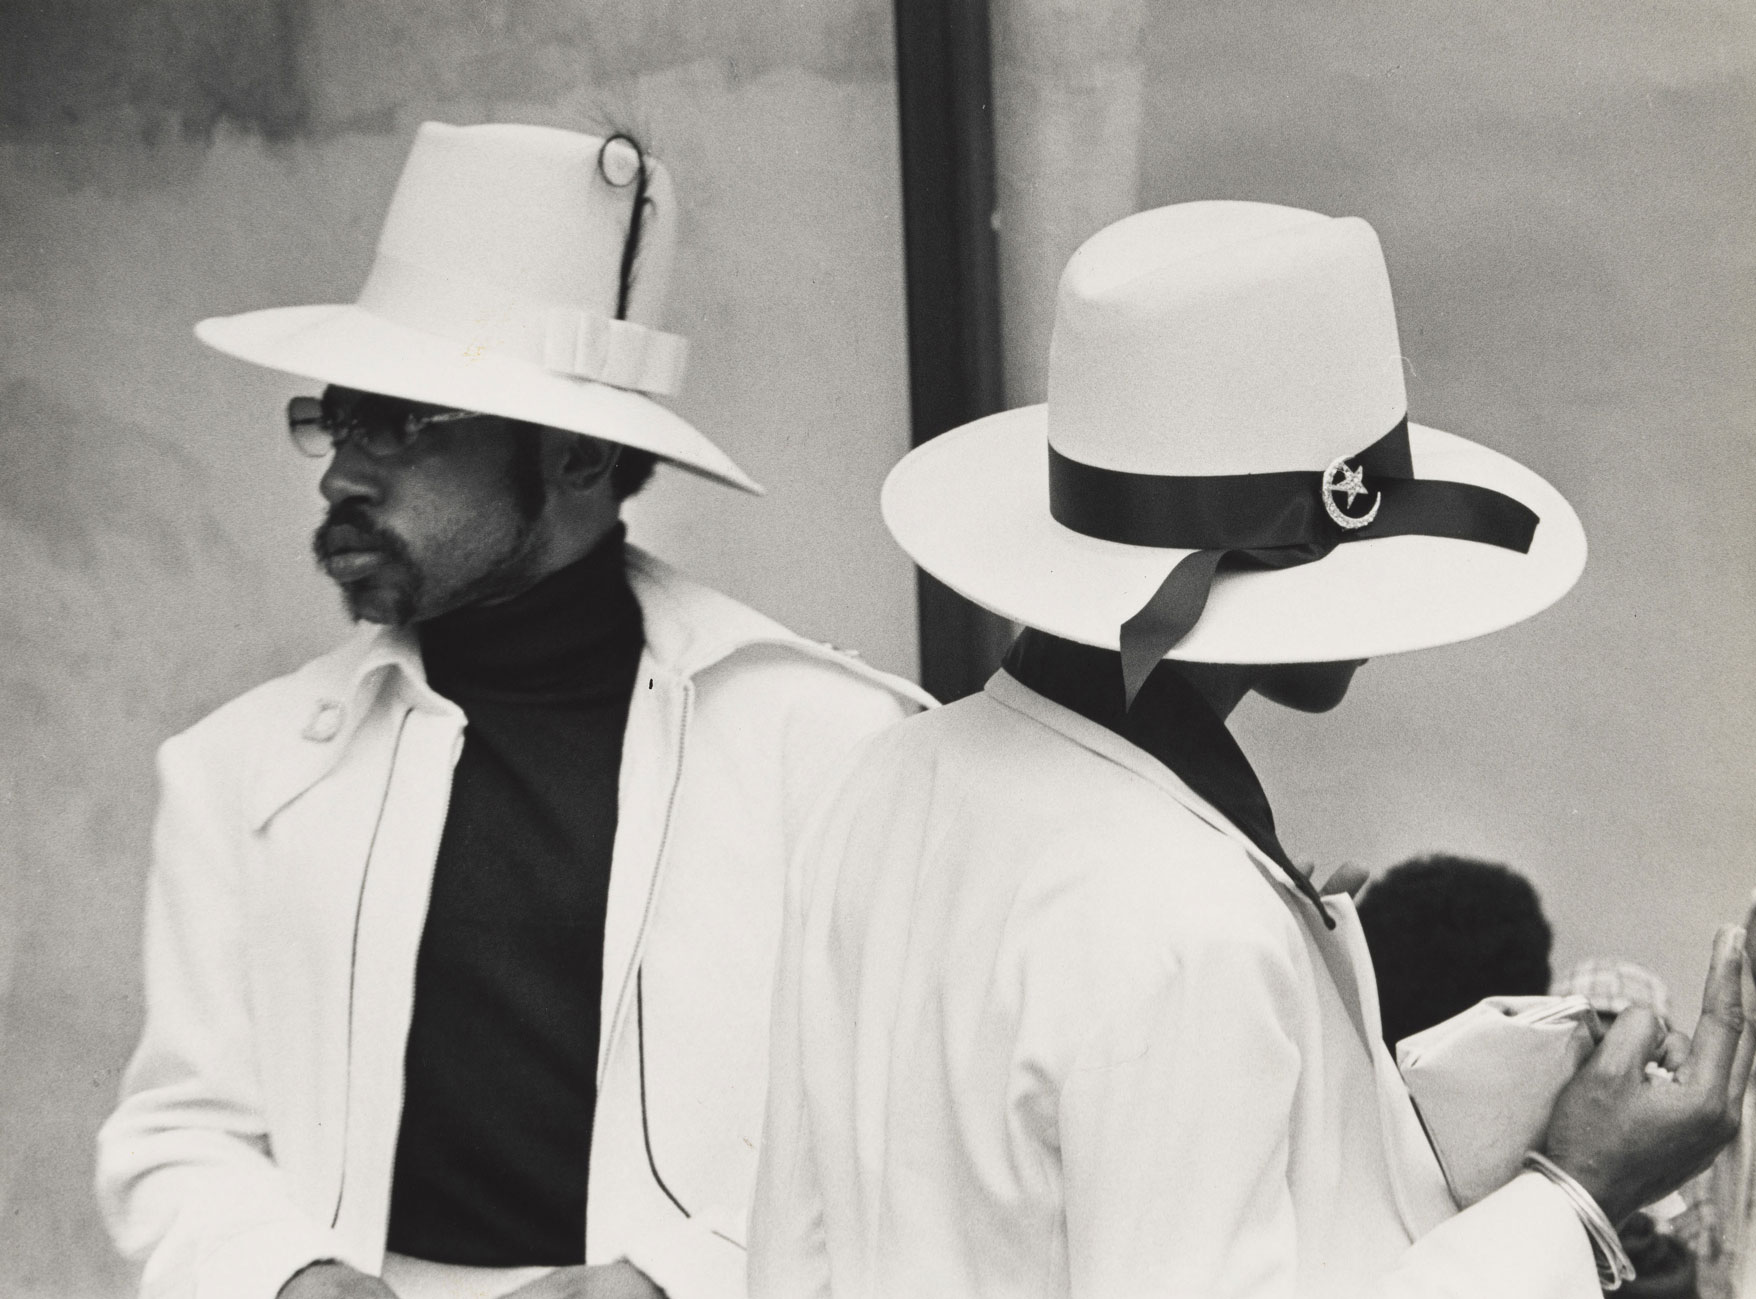 Shawn Walker (b. 1940), Easter Sunday, Harlem (125th Street), 1972. Whitney Museum of American Art, New York; purchase with funds from the Photography Committee, the Jack E. Chachkes Endowed Purchase Fund, and the Robert Mapplethorpe Foundation 2020.61. © Shawn Walker